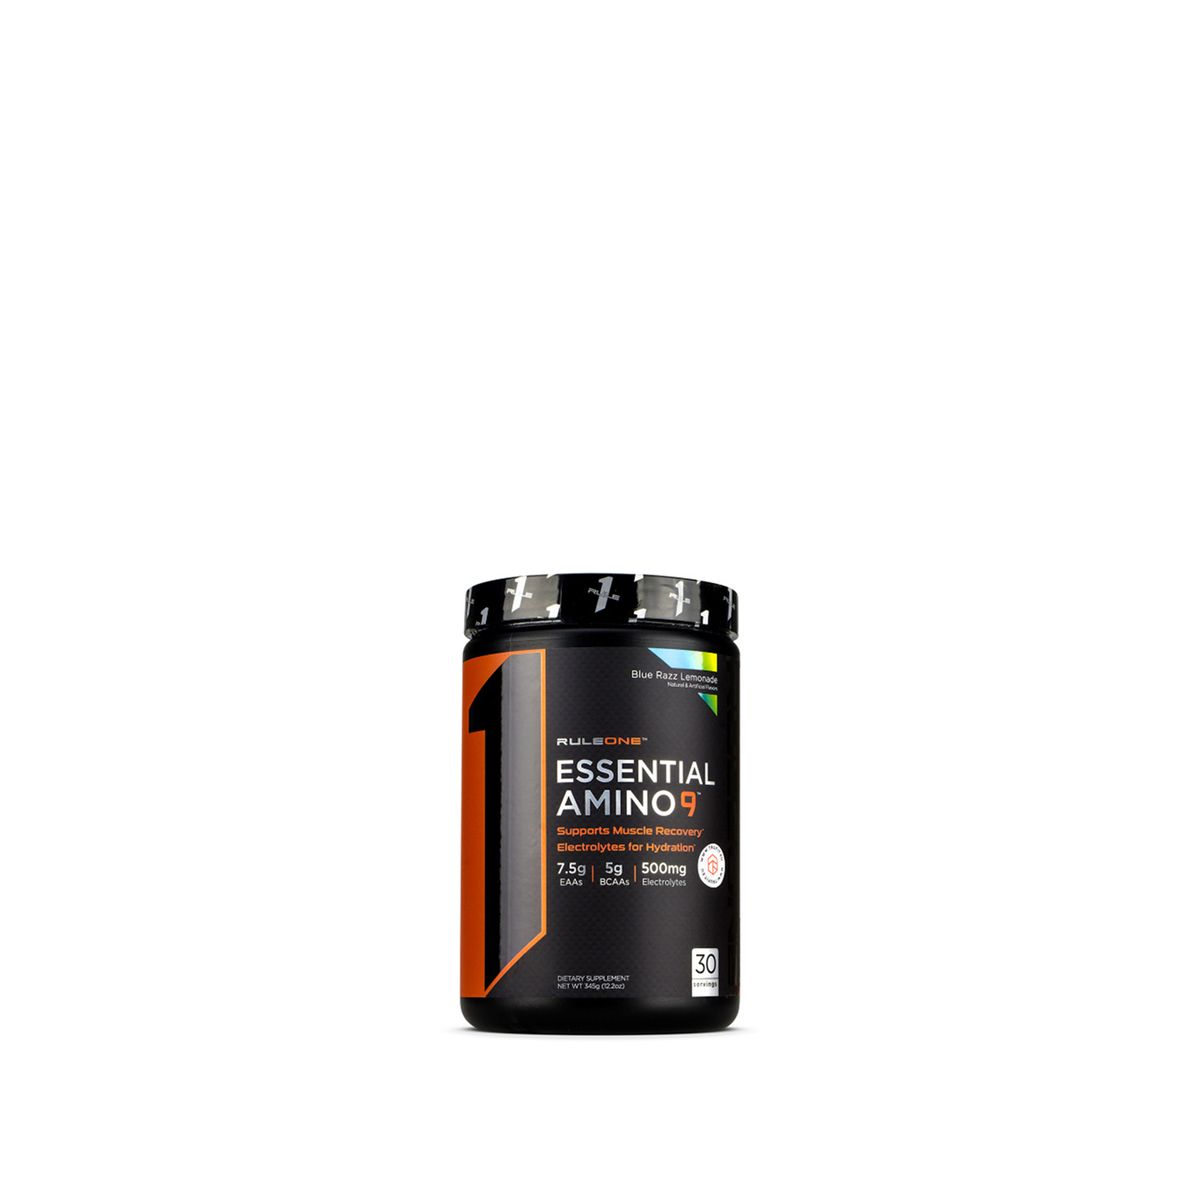 RULE1 - ESSENTIAL AMINO 9 - SUPPORTS MUSCLE RECOVERY - 345 G